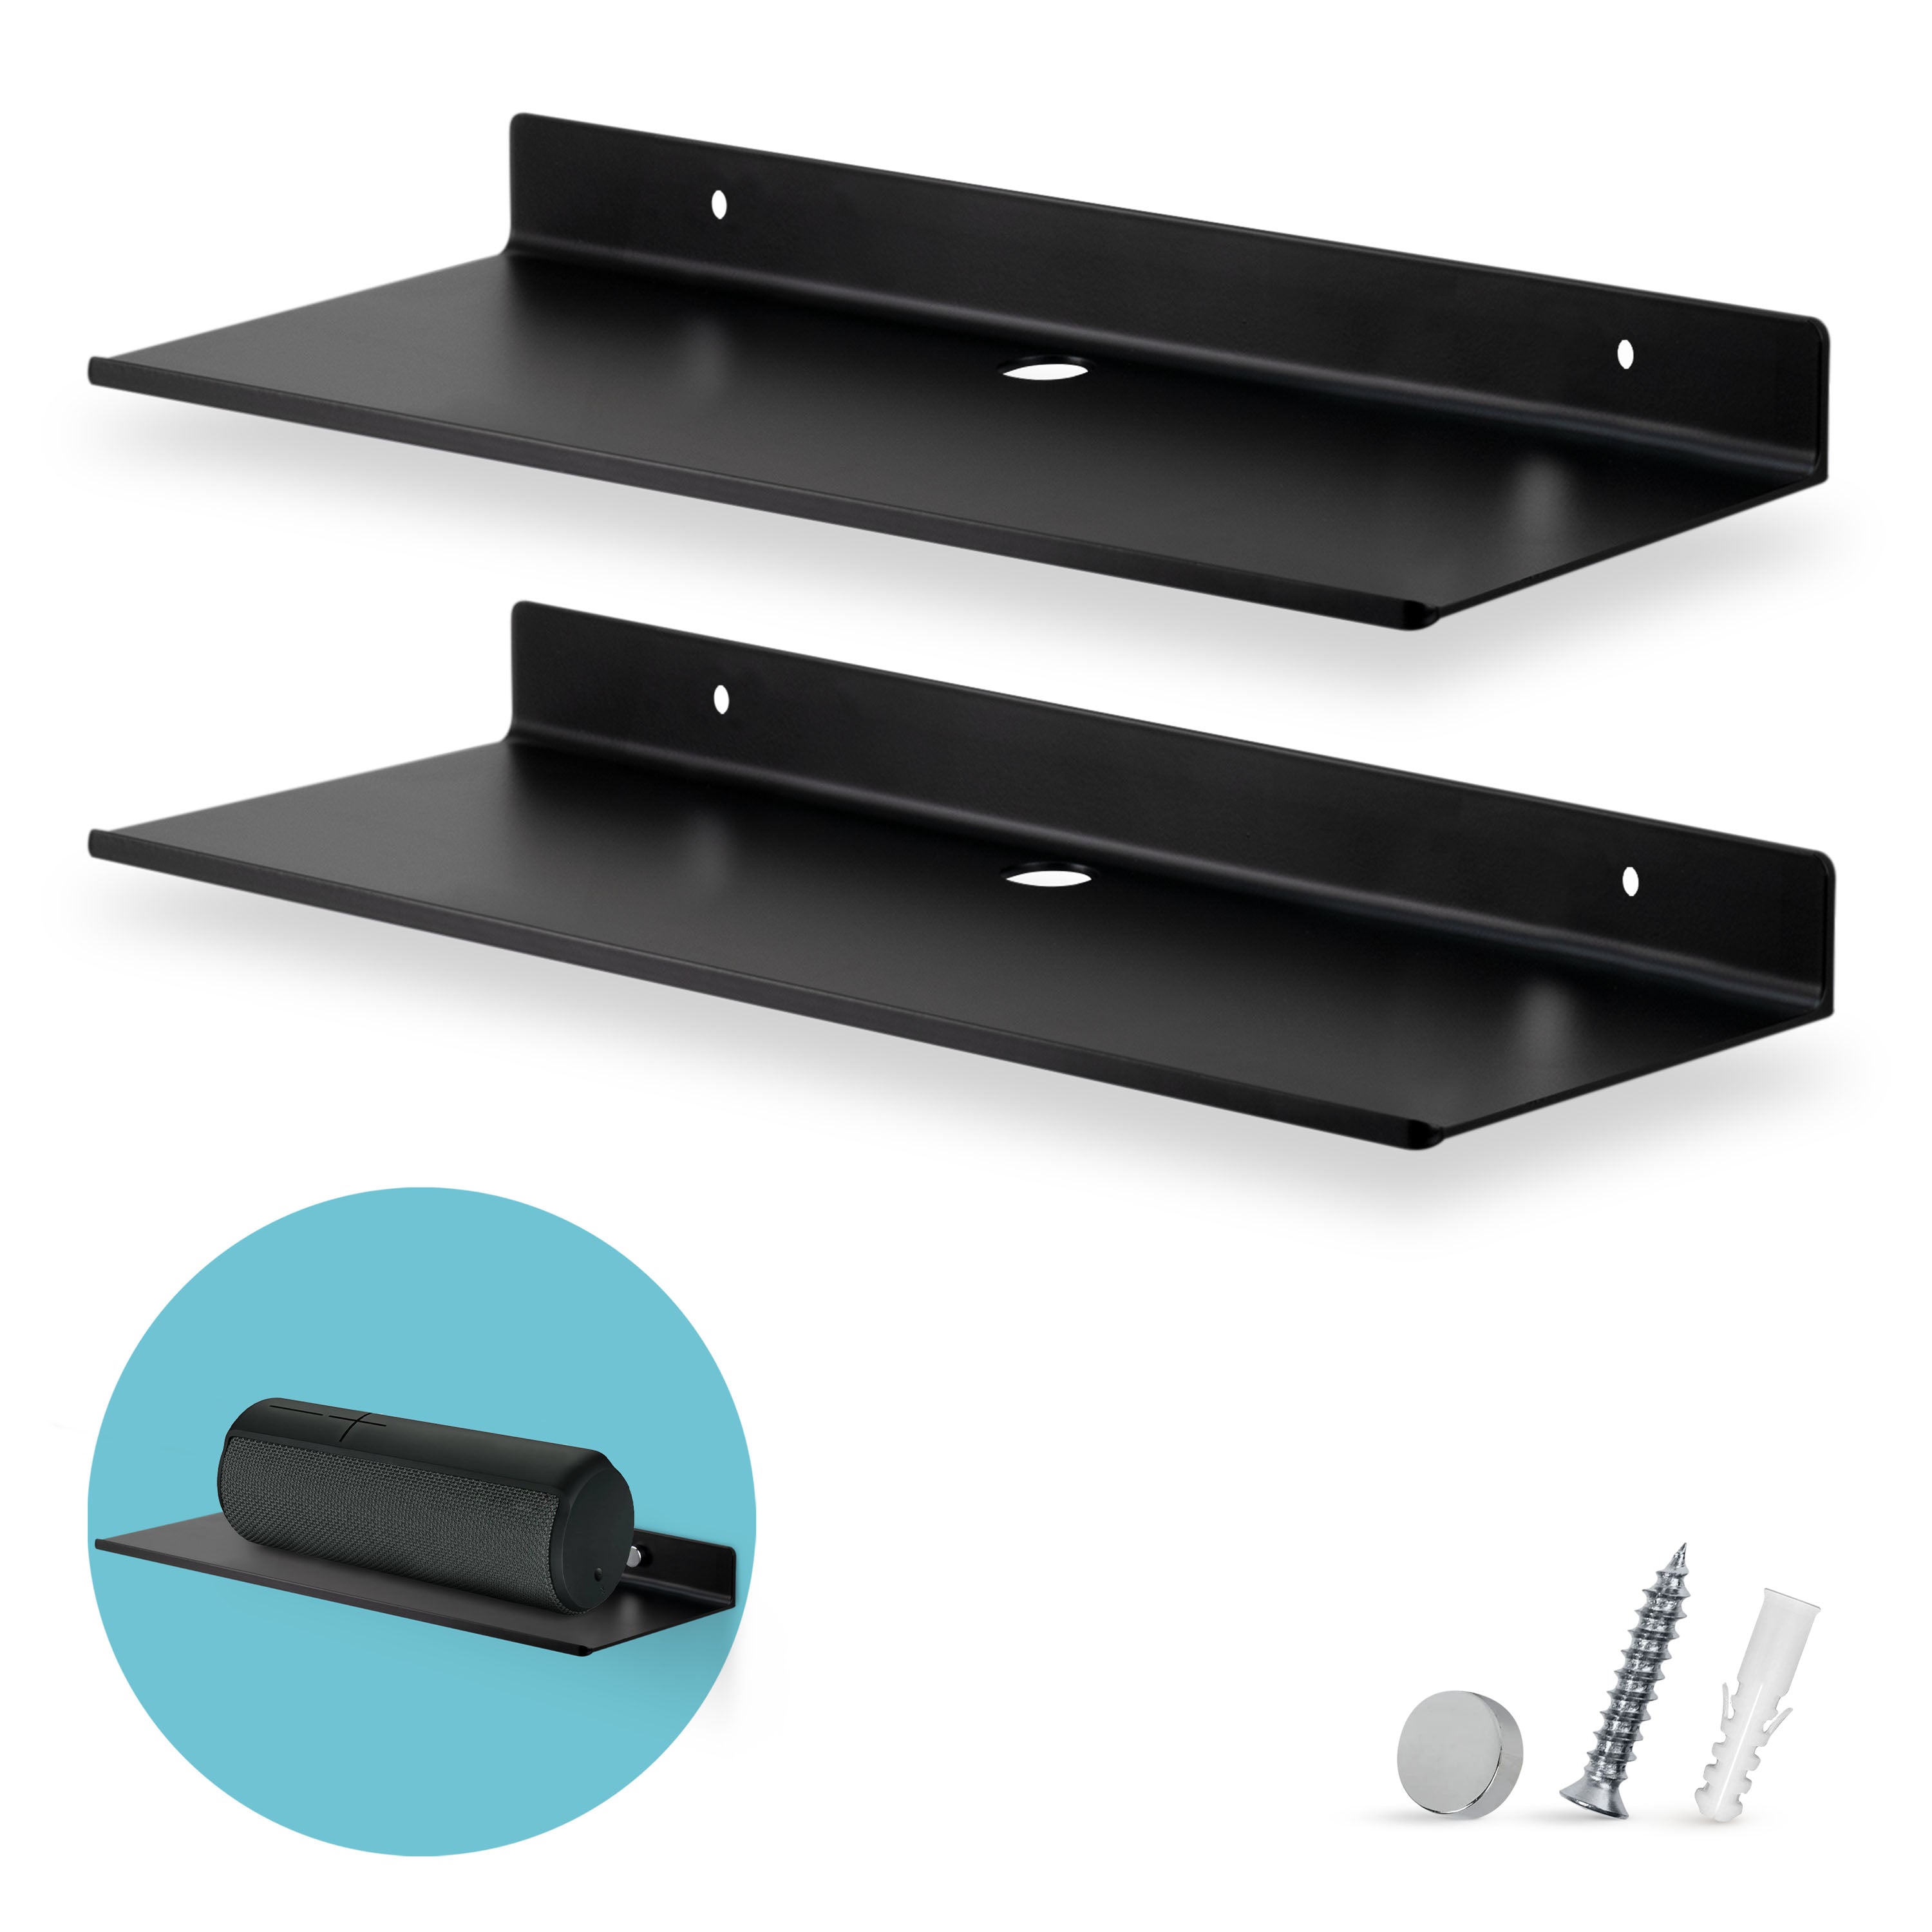 Brainwavz 2-Pack 9” Floating Shelf Bluetooth Speaker Stand, Adhesive & Screw Wall Mount, Anti Slip, for Cameras, Baby Monitors, Webcam, Router, Wide